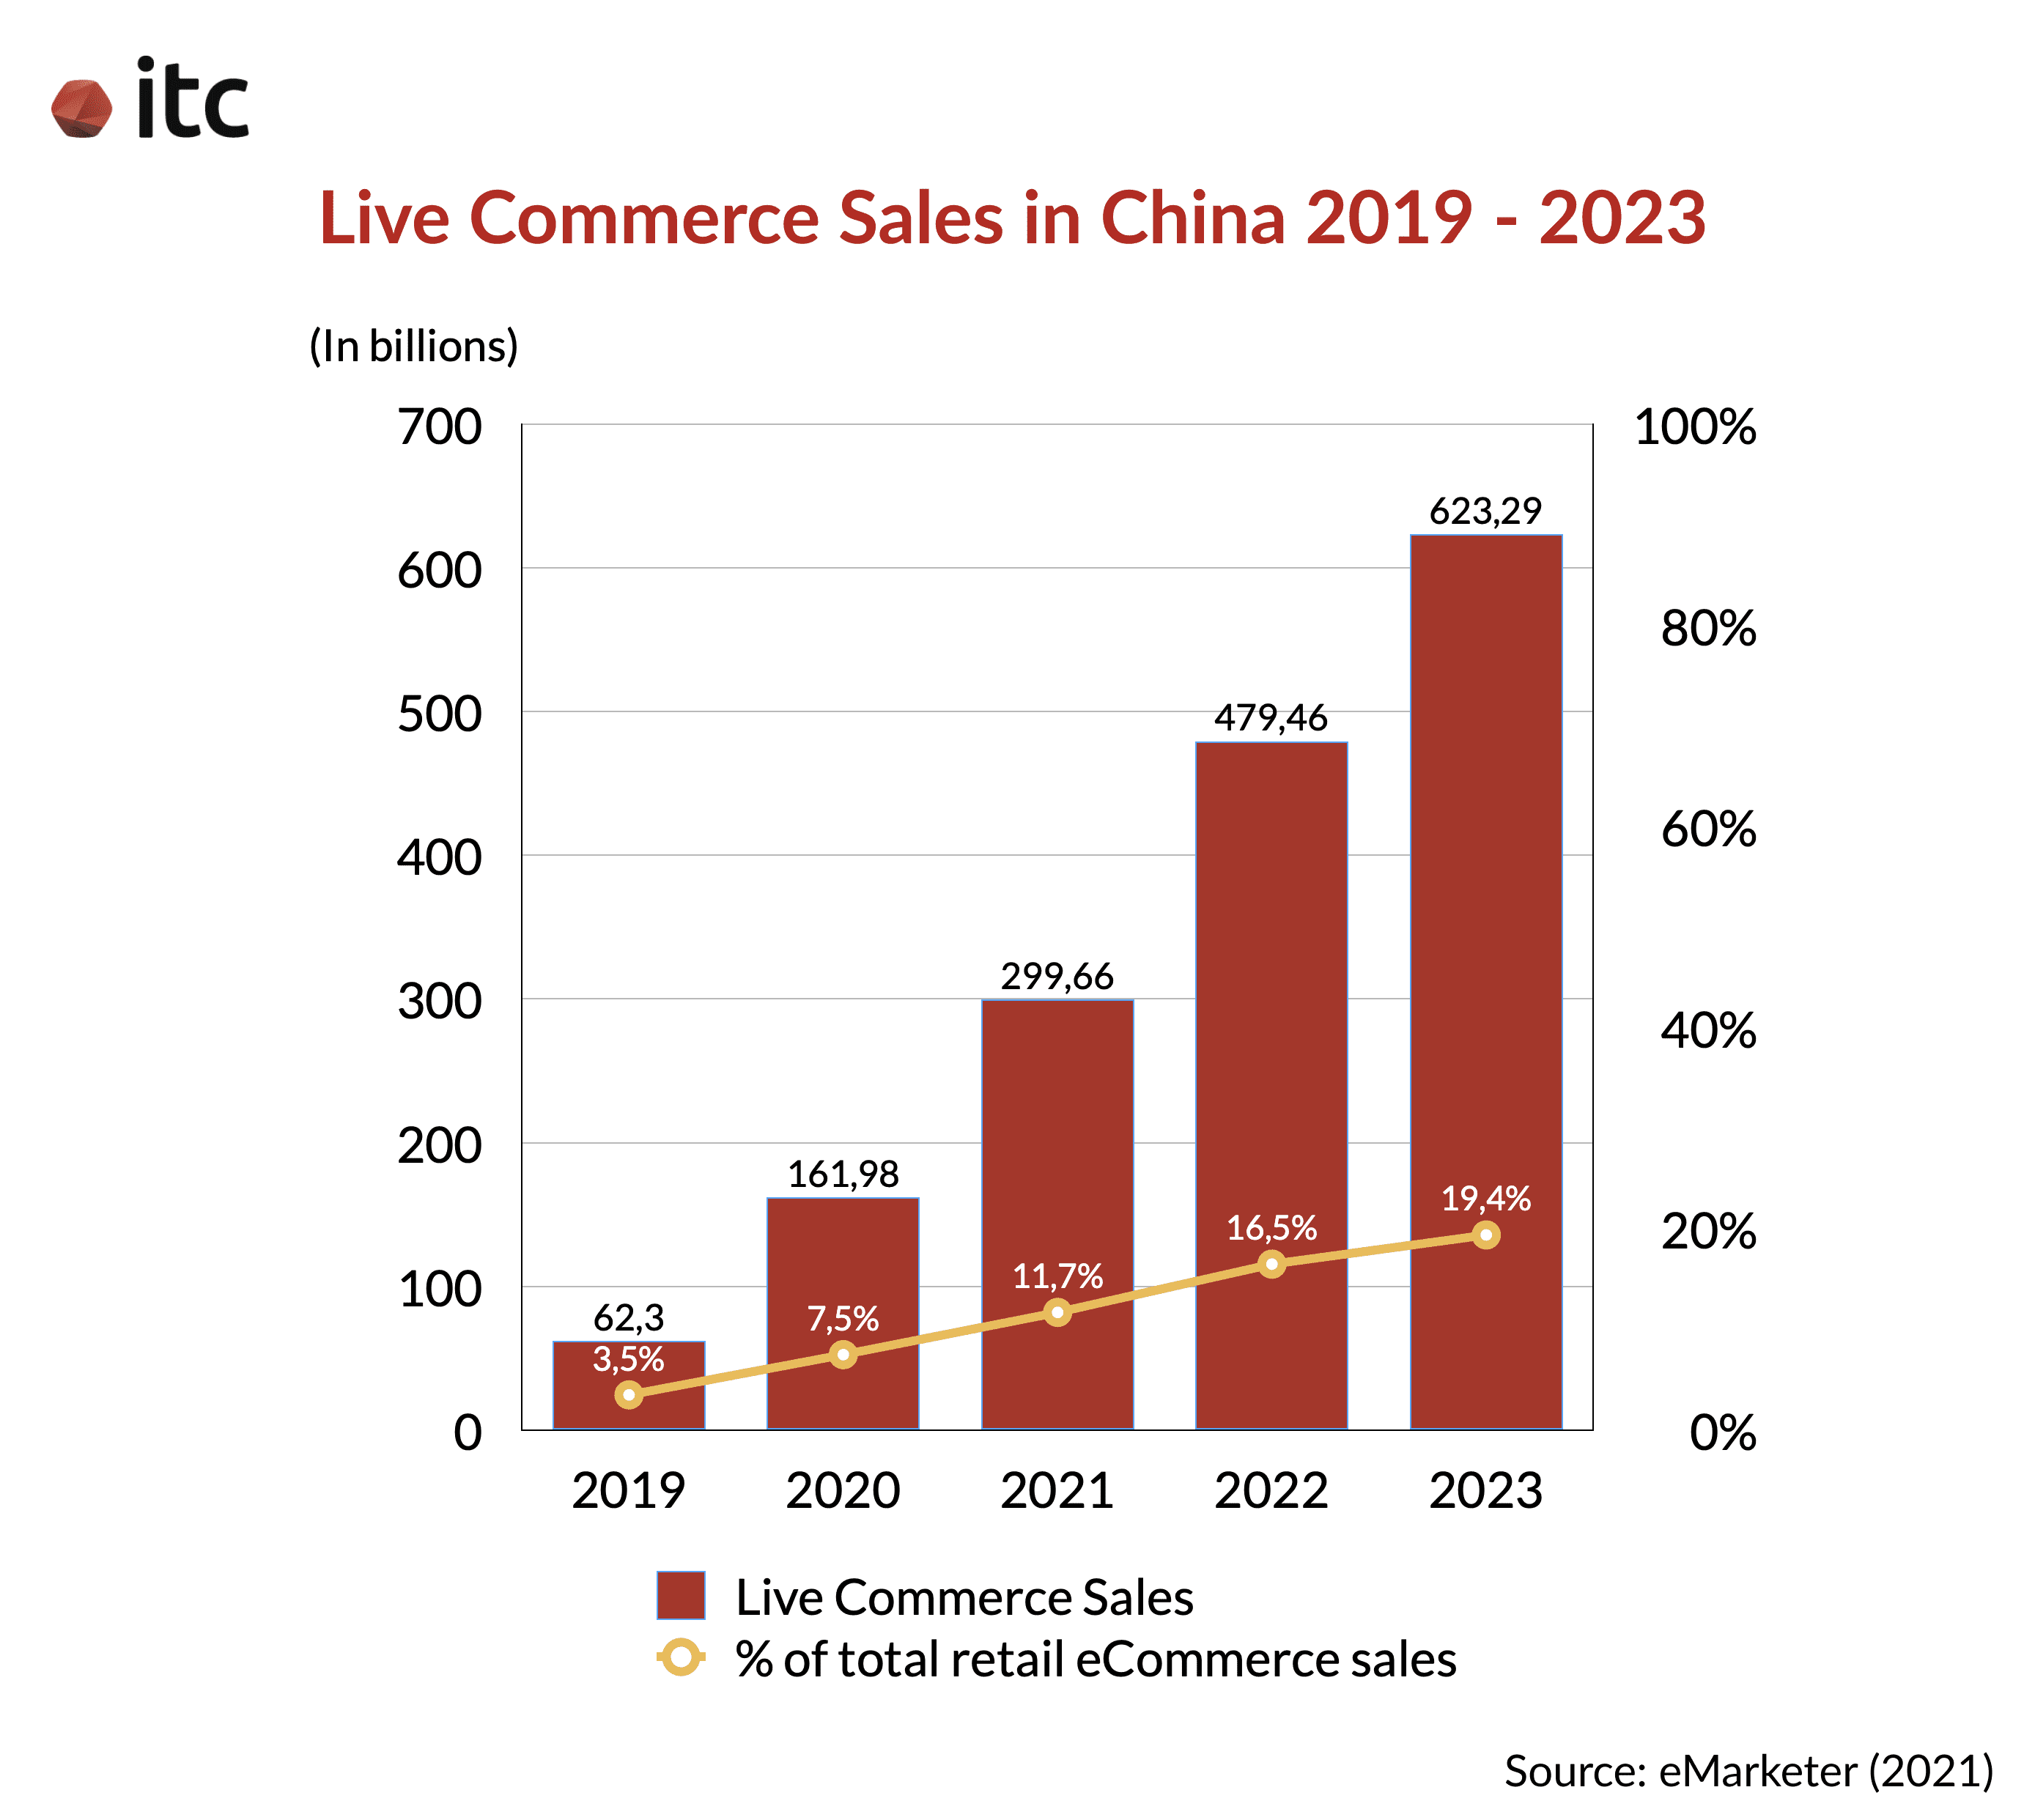 A chart illustrating sales from Live Commerce and how much percentage they contribute to the total retail eCommerce sales in China from 2019 to 2023